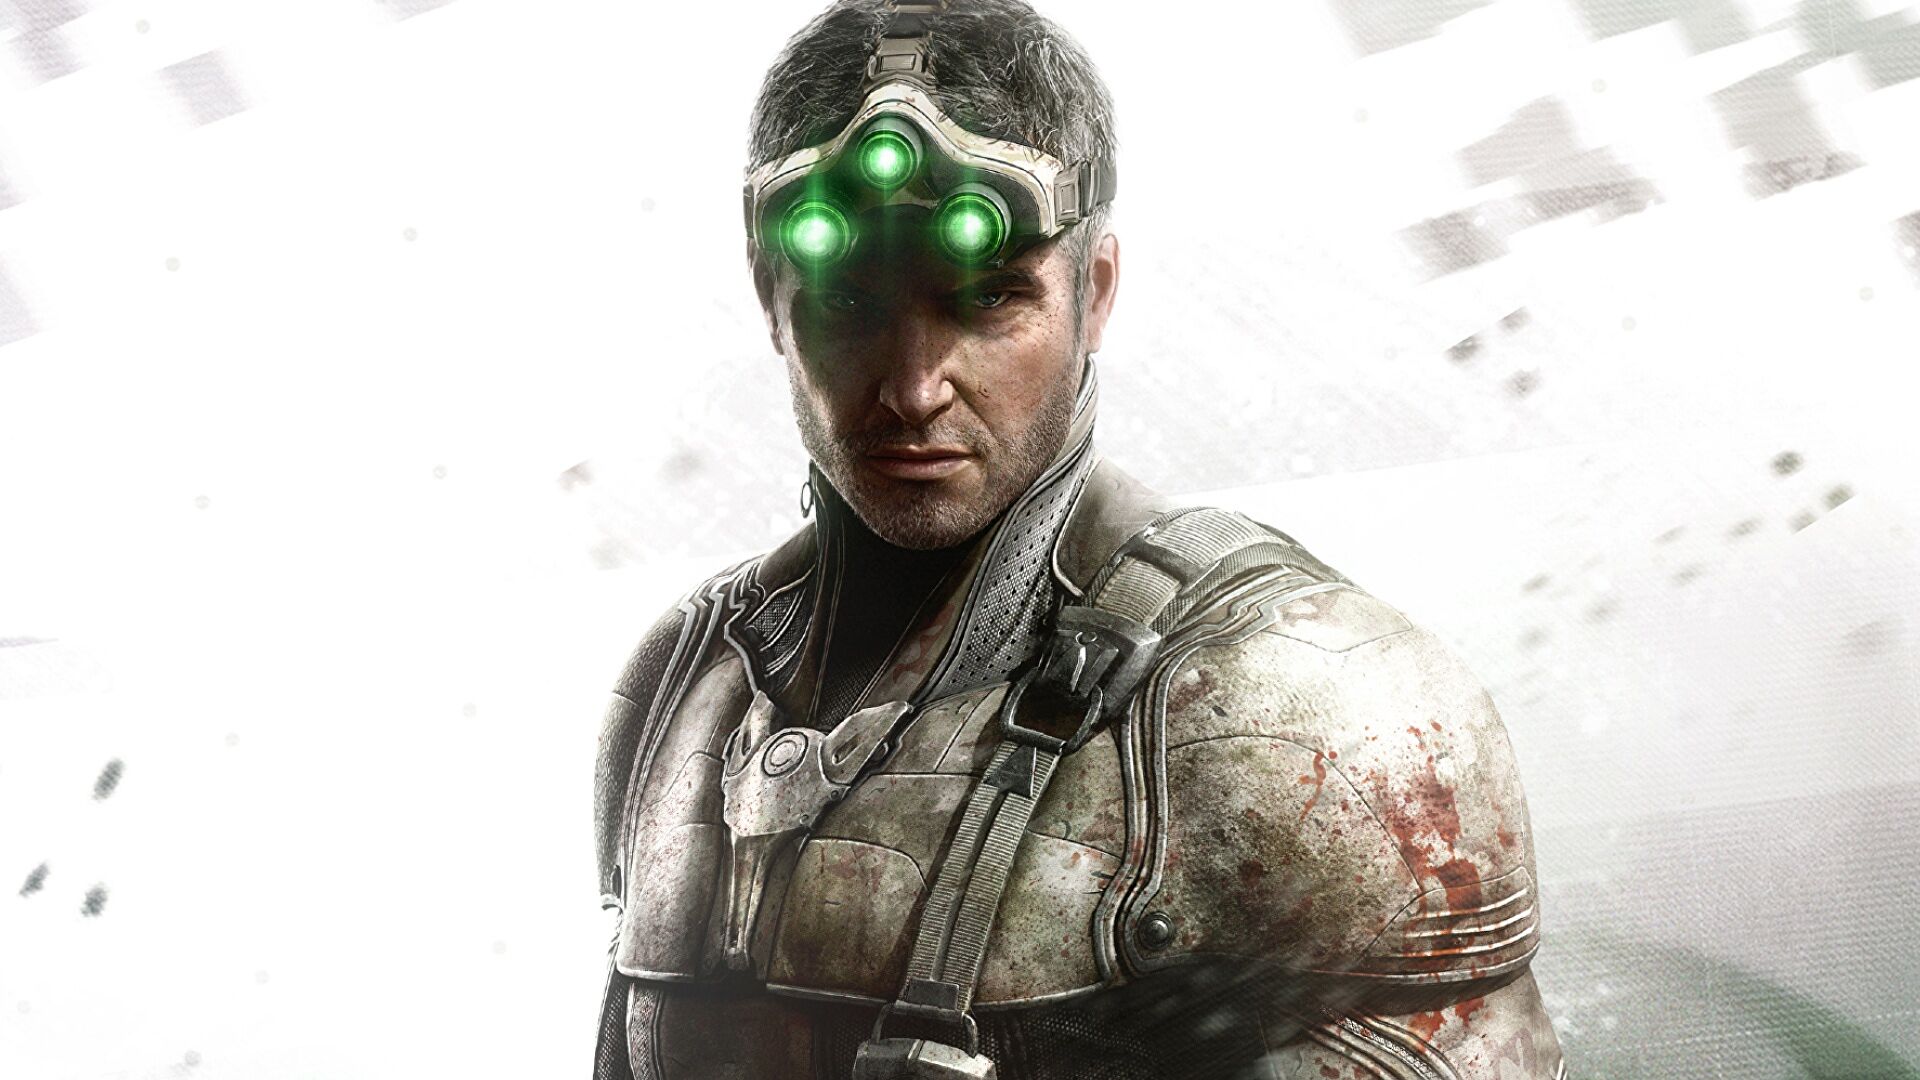 Ubisoft’s Splinter Cell remake will be “rewriting and updating” the story for today’s players